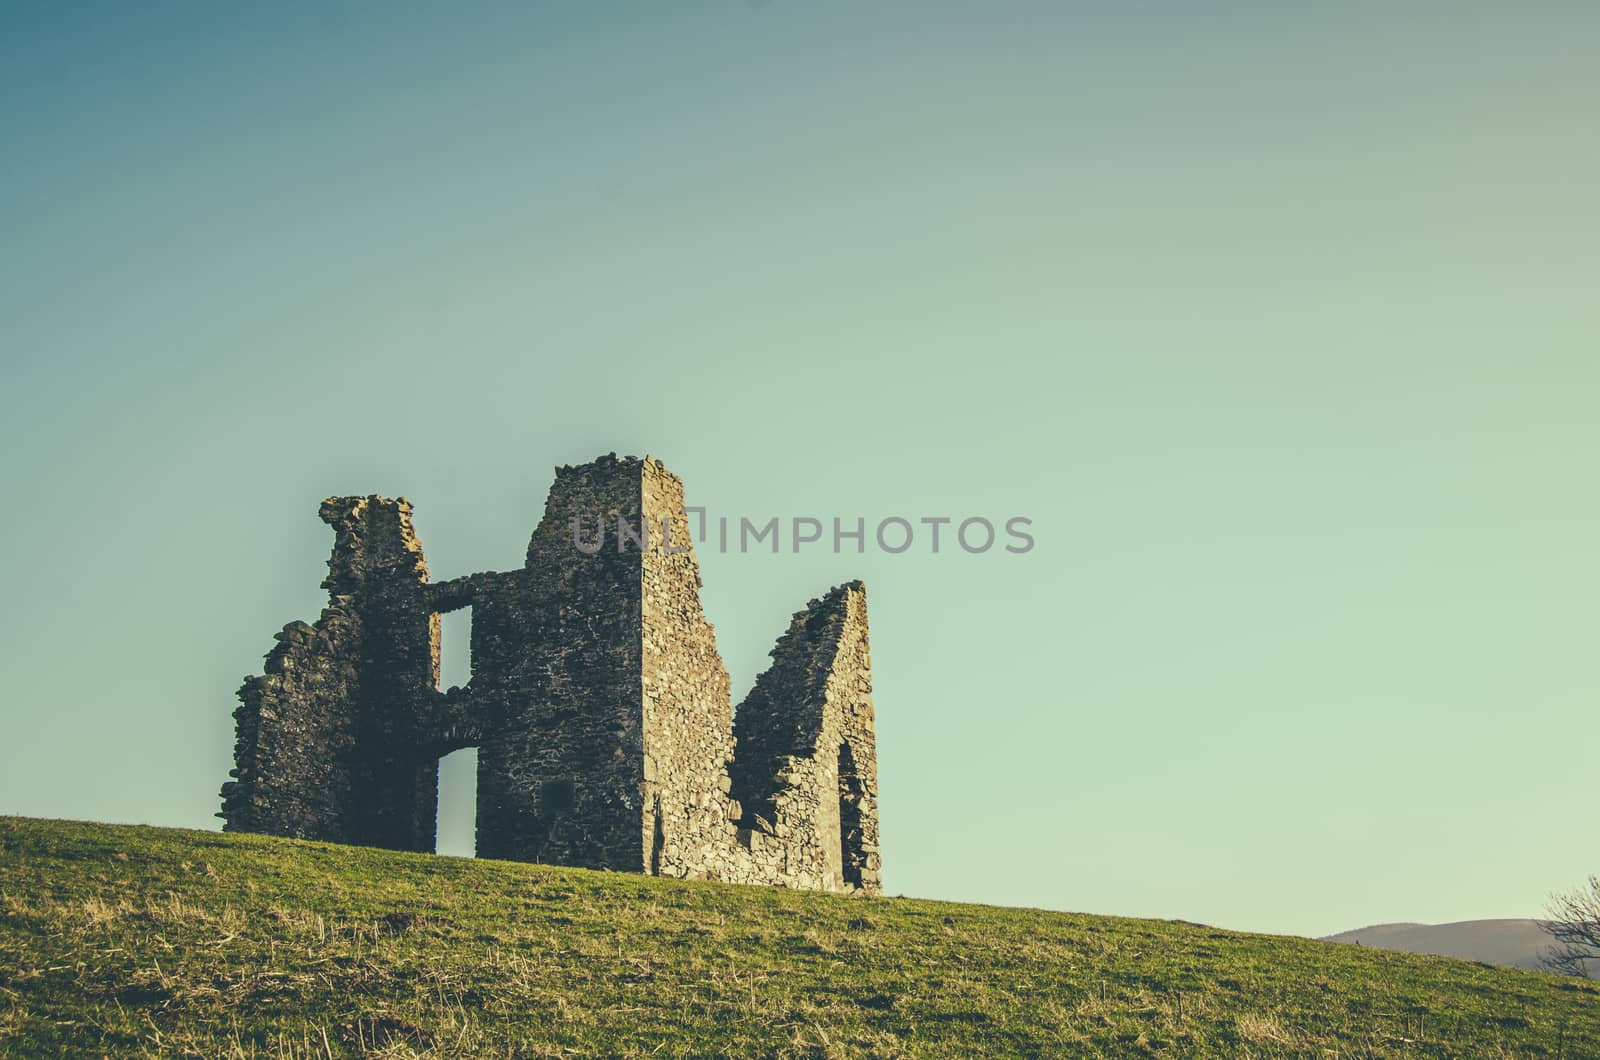 VIntage FIltered Photo Of Ruined Castle Or Folly In Great Britain